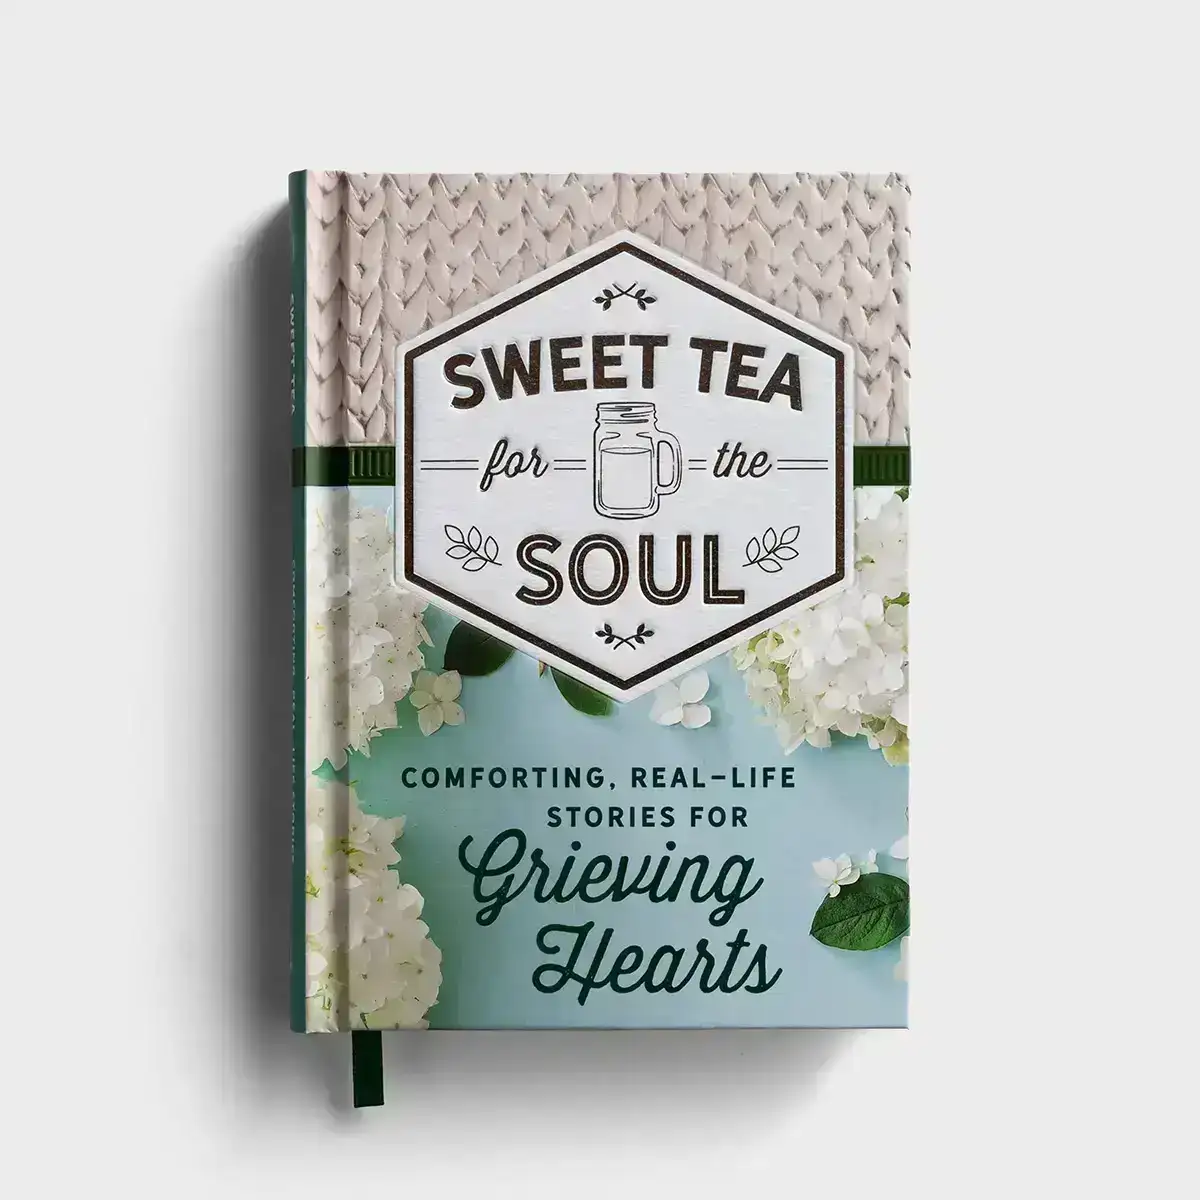 Sweet Tea for the Soul: Comforting, Real-Life Stories for Grieving Hearts? - Gift Book